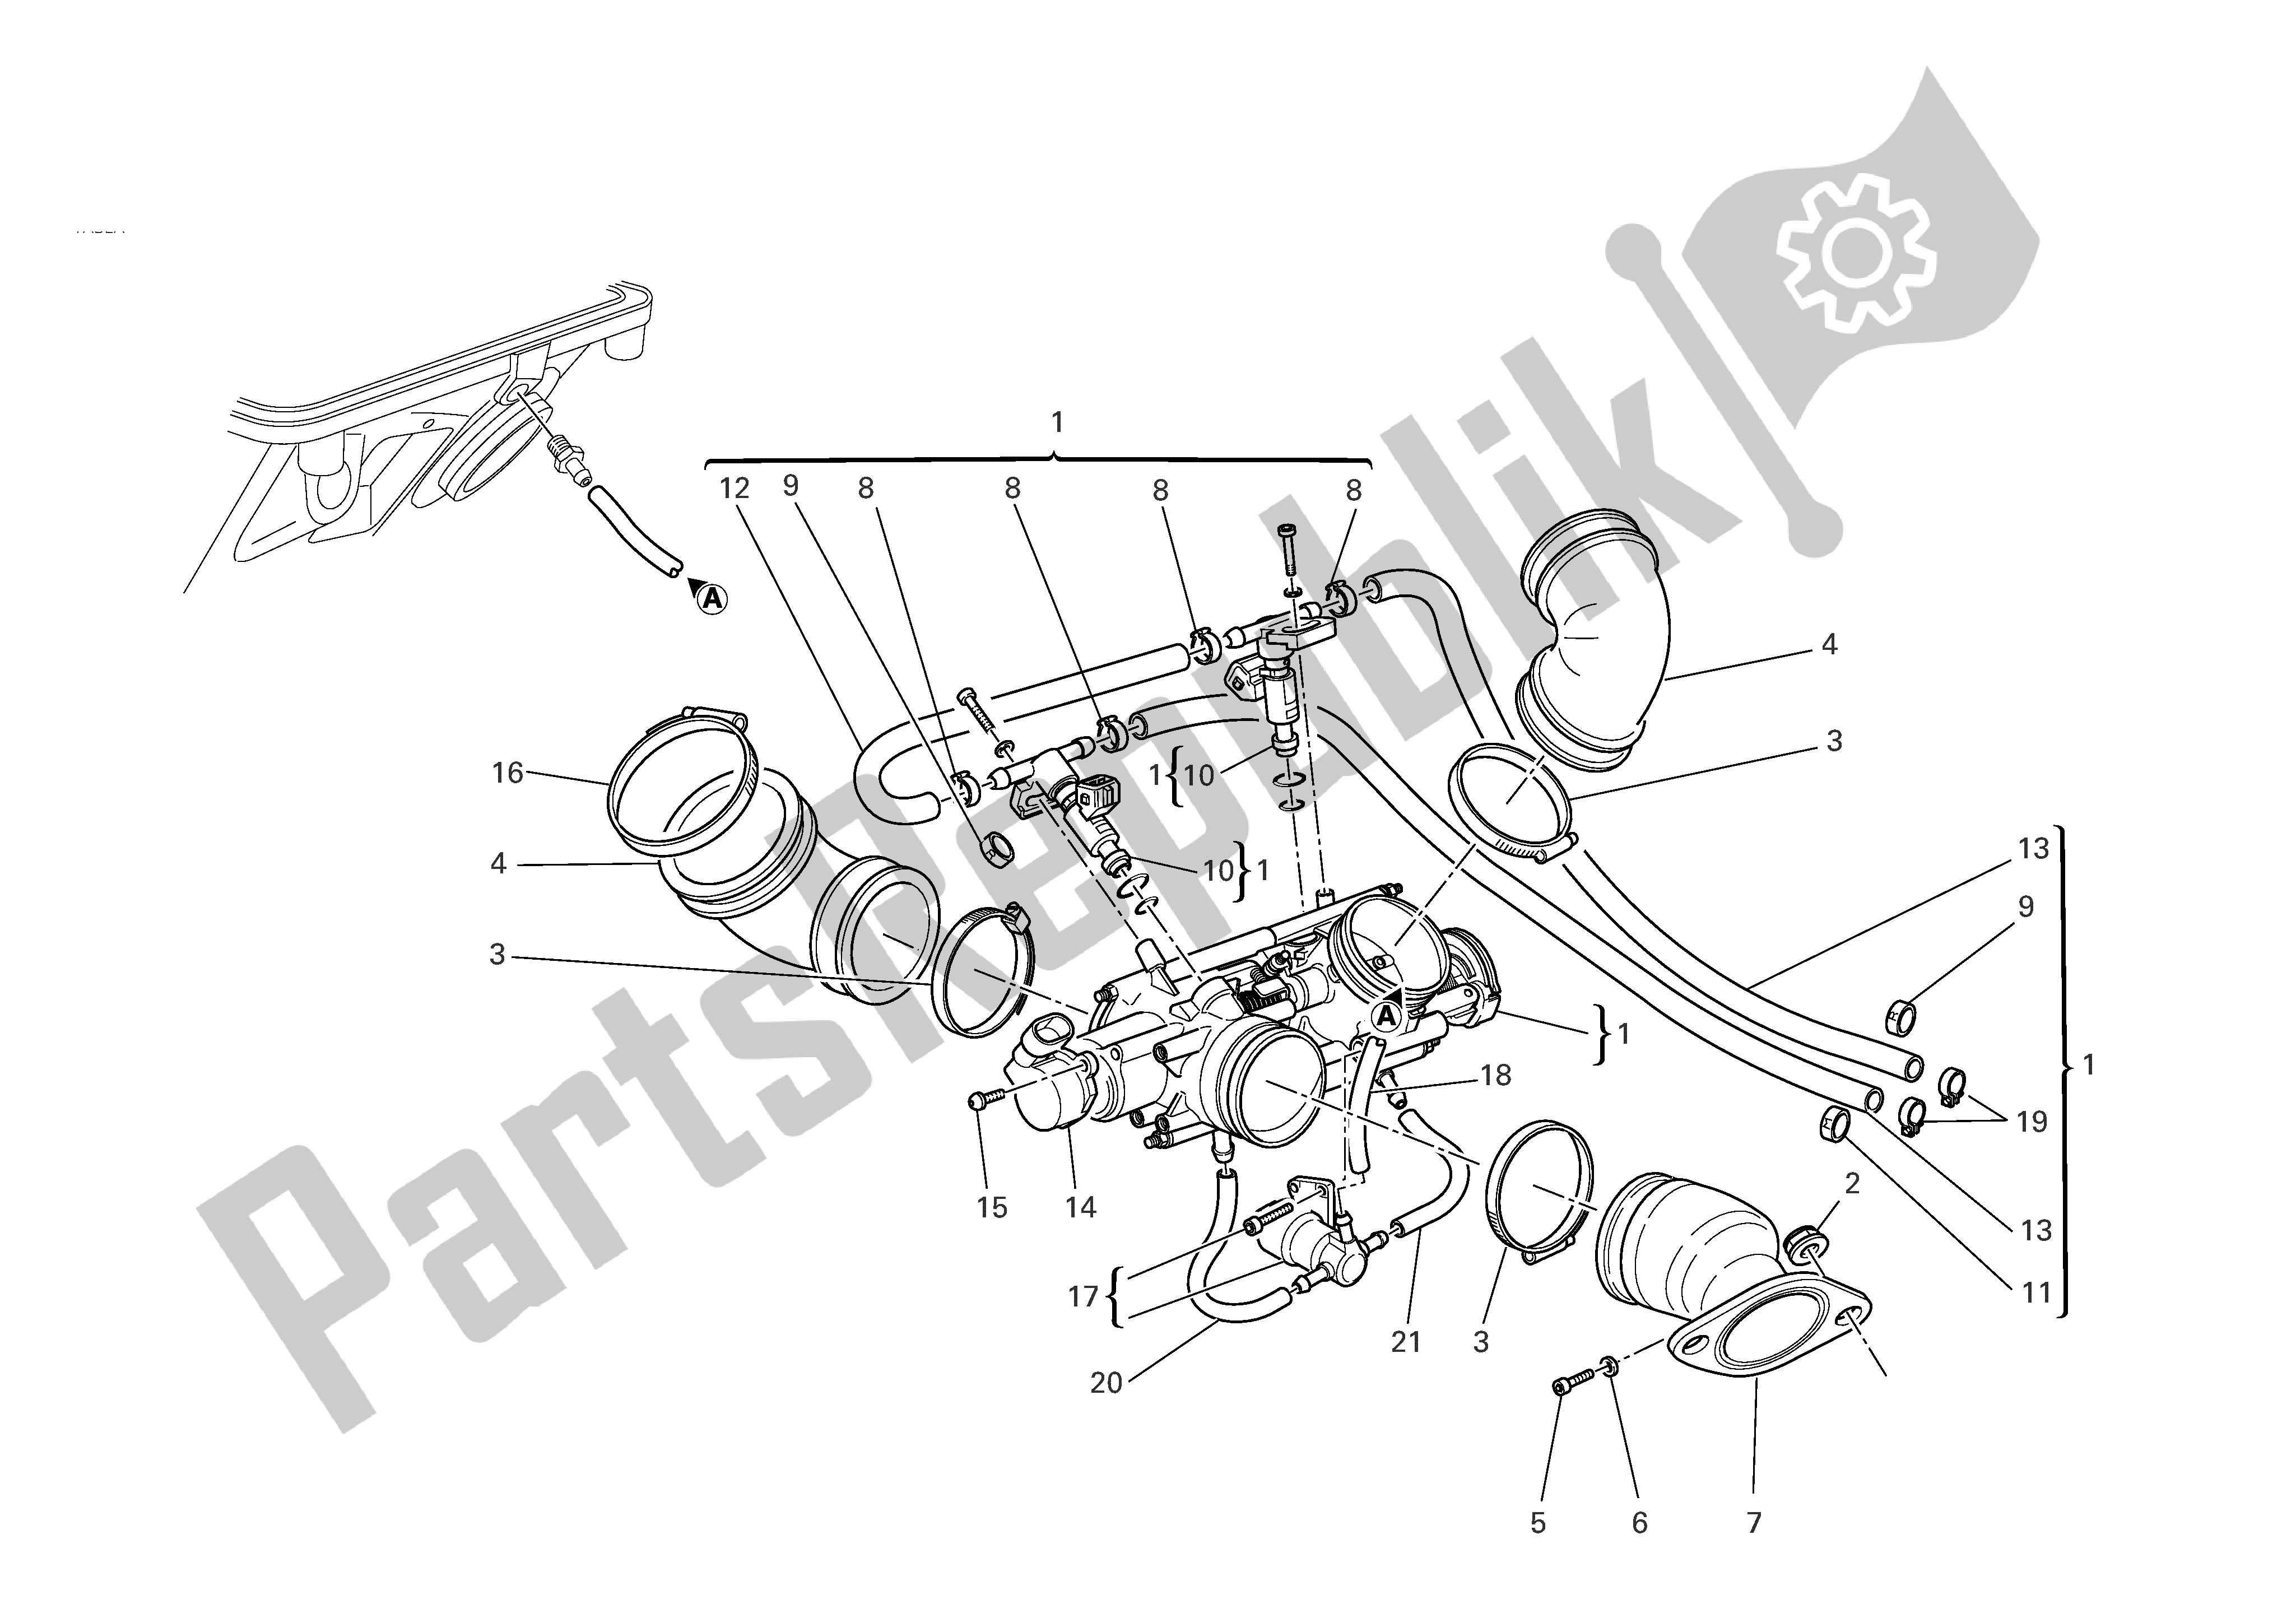 All parts for the Intake Manifolds of the Ducati Multistrada S 1000 2005